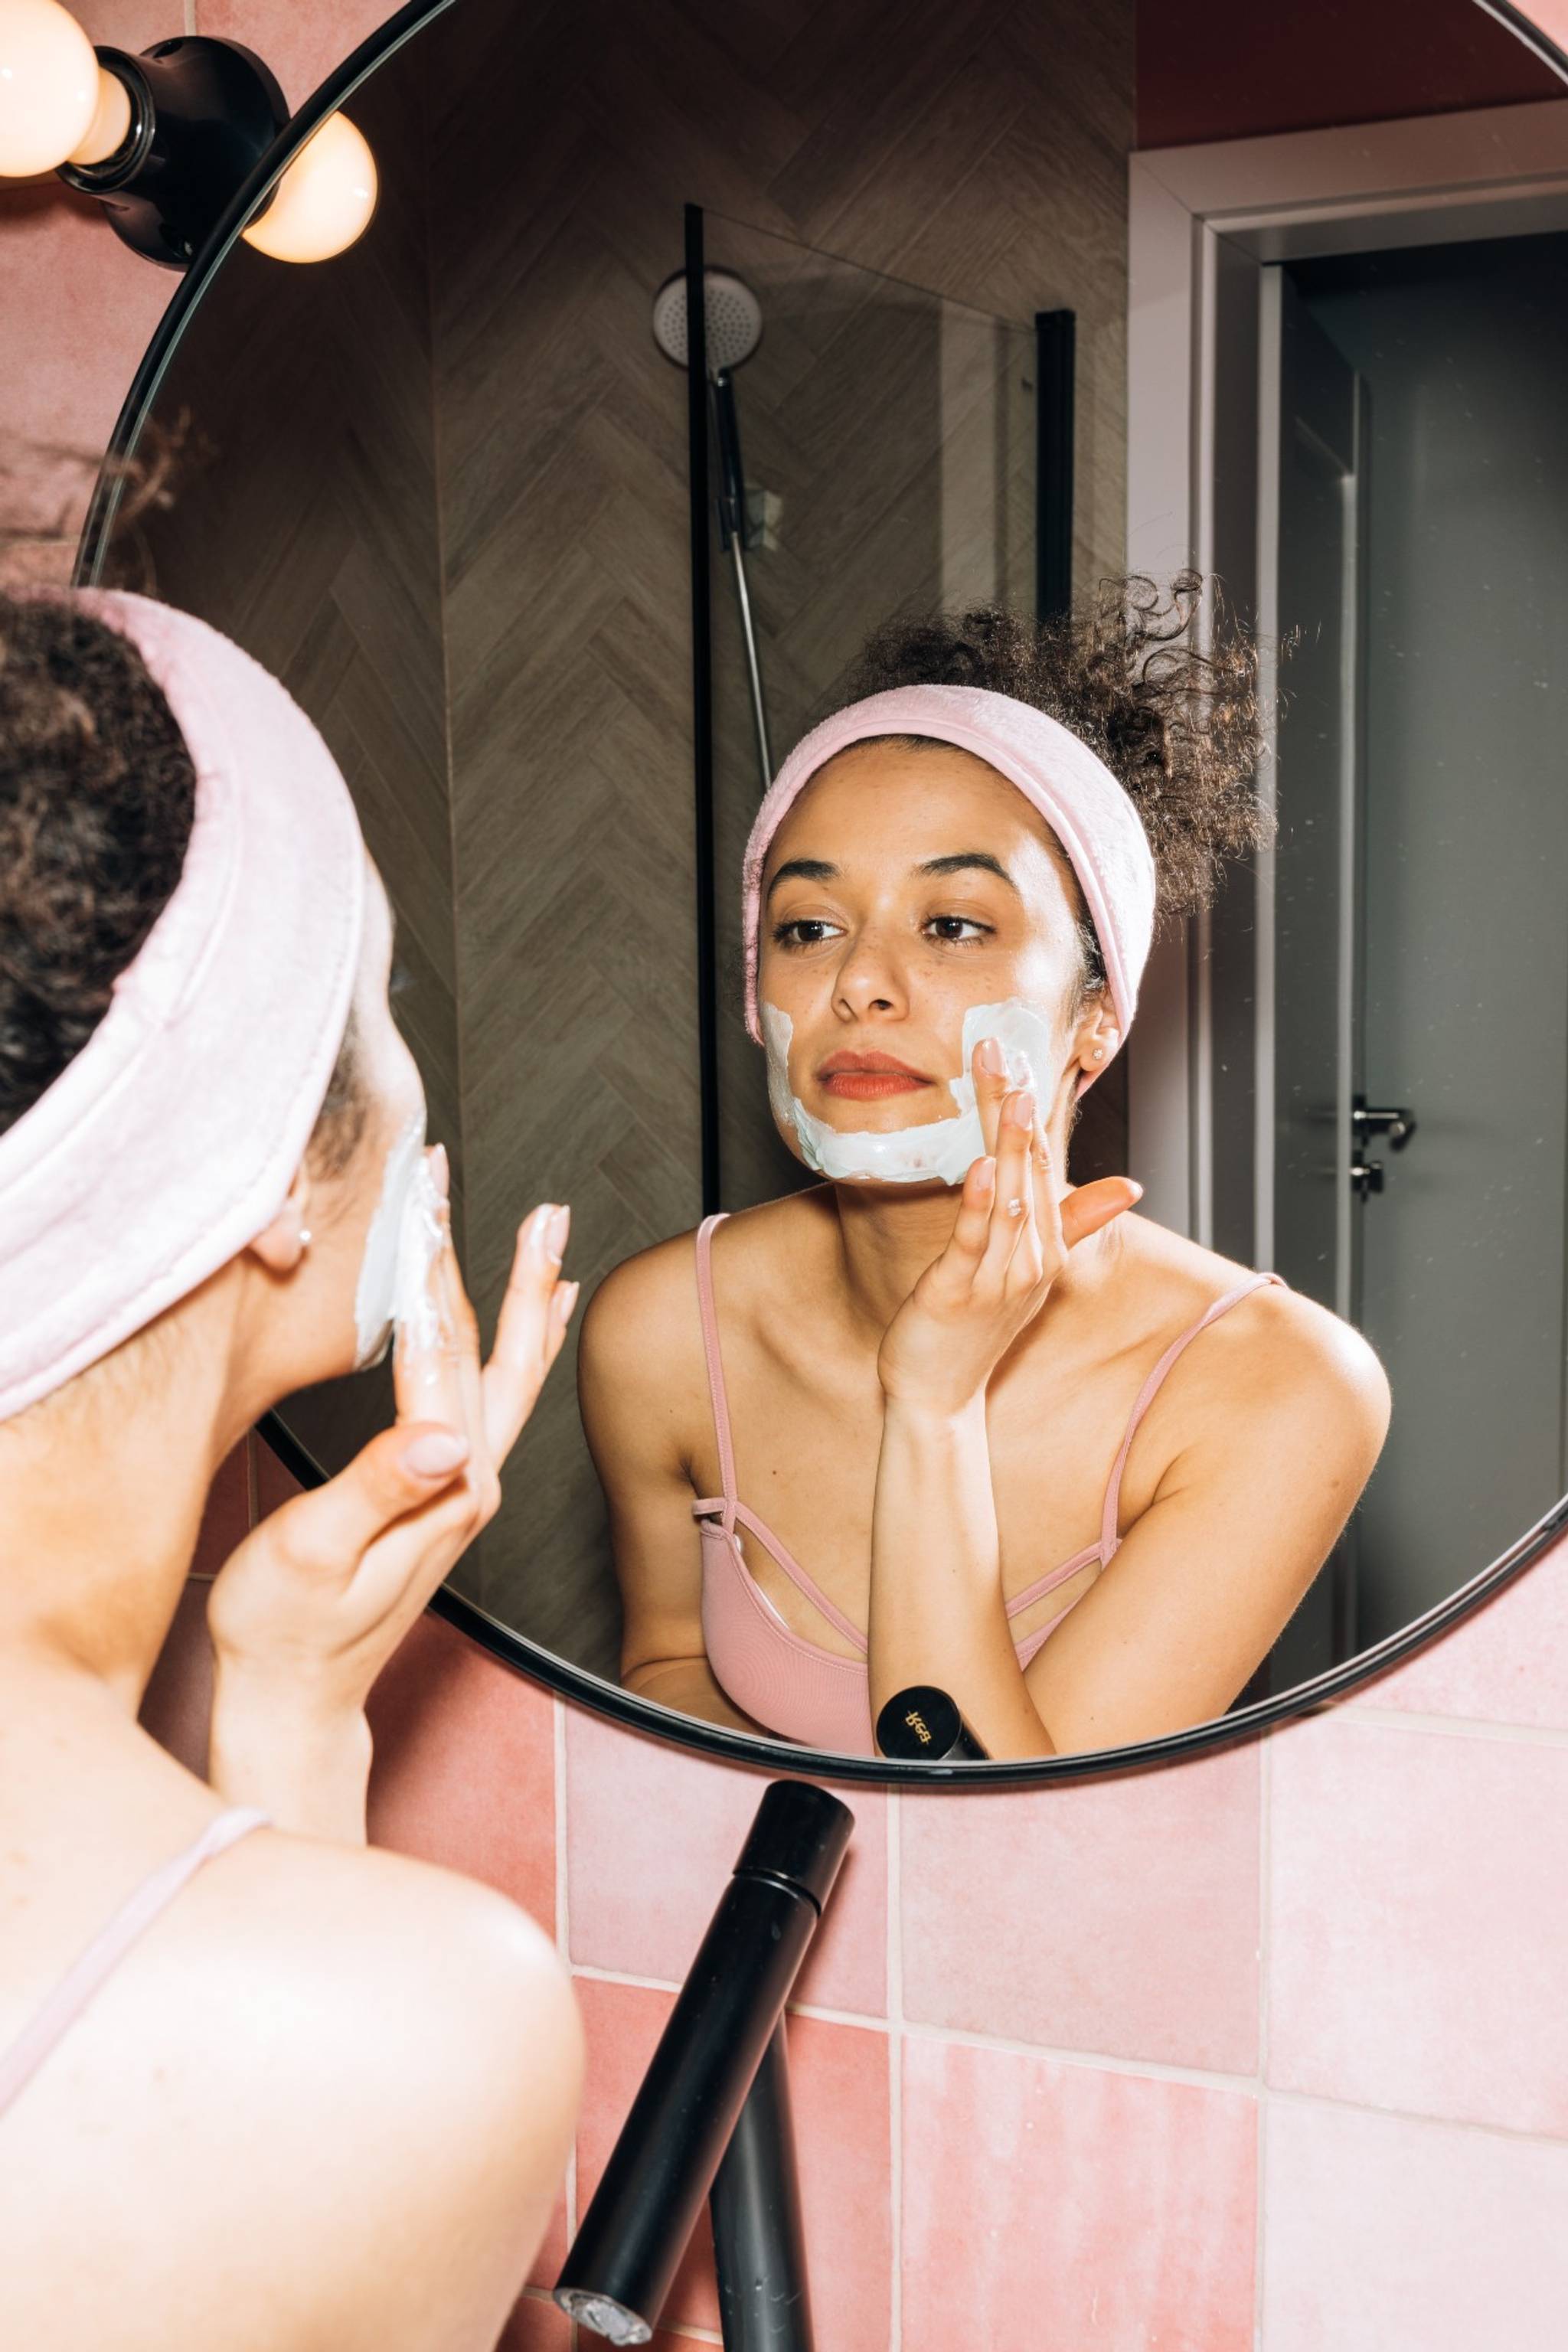 Labels on ‘natural’ beauty products are misleading